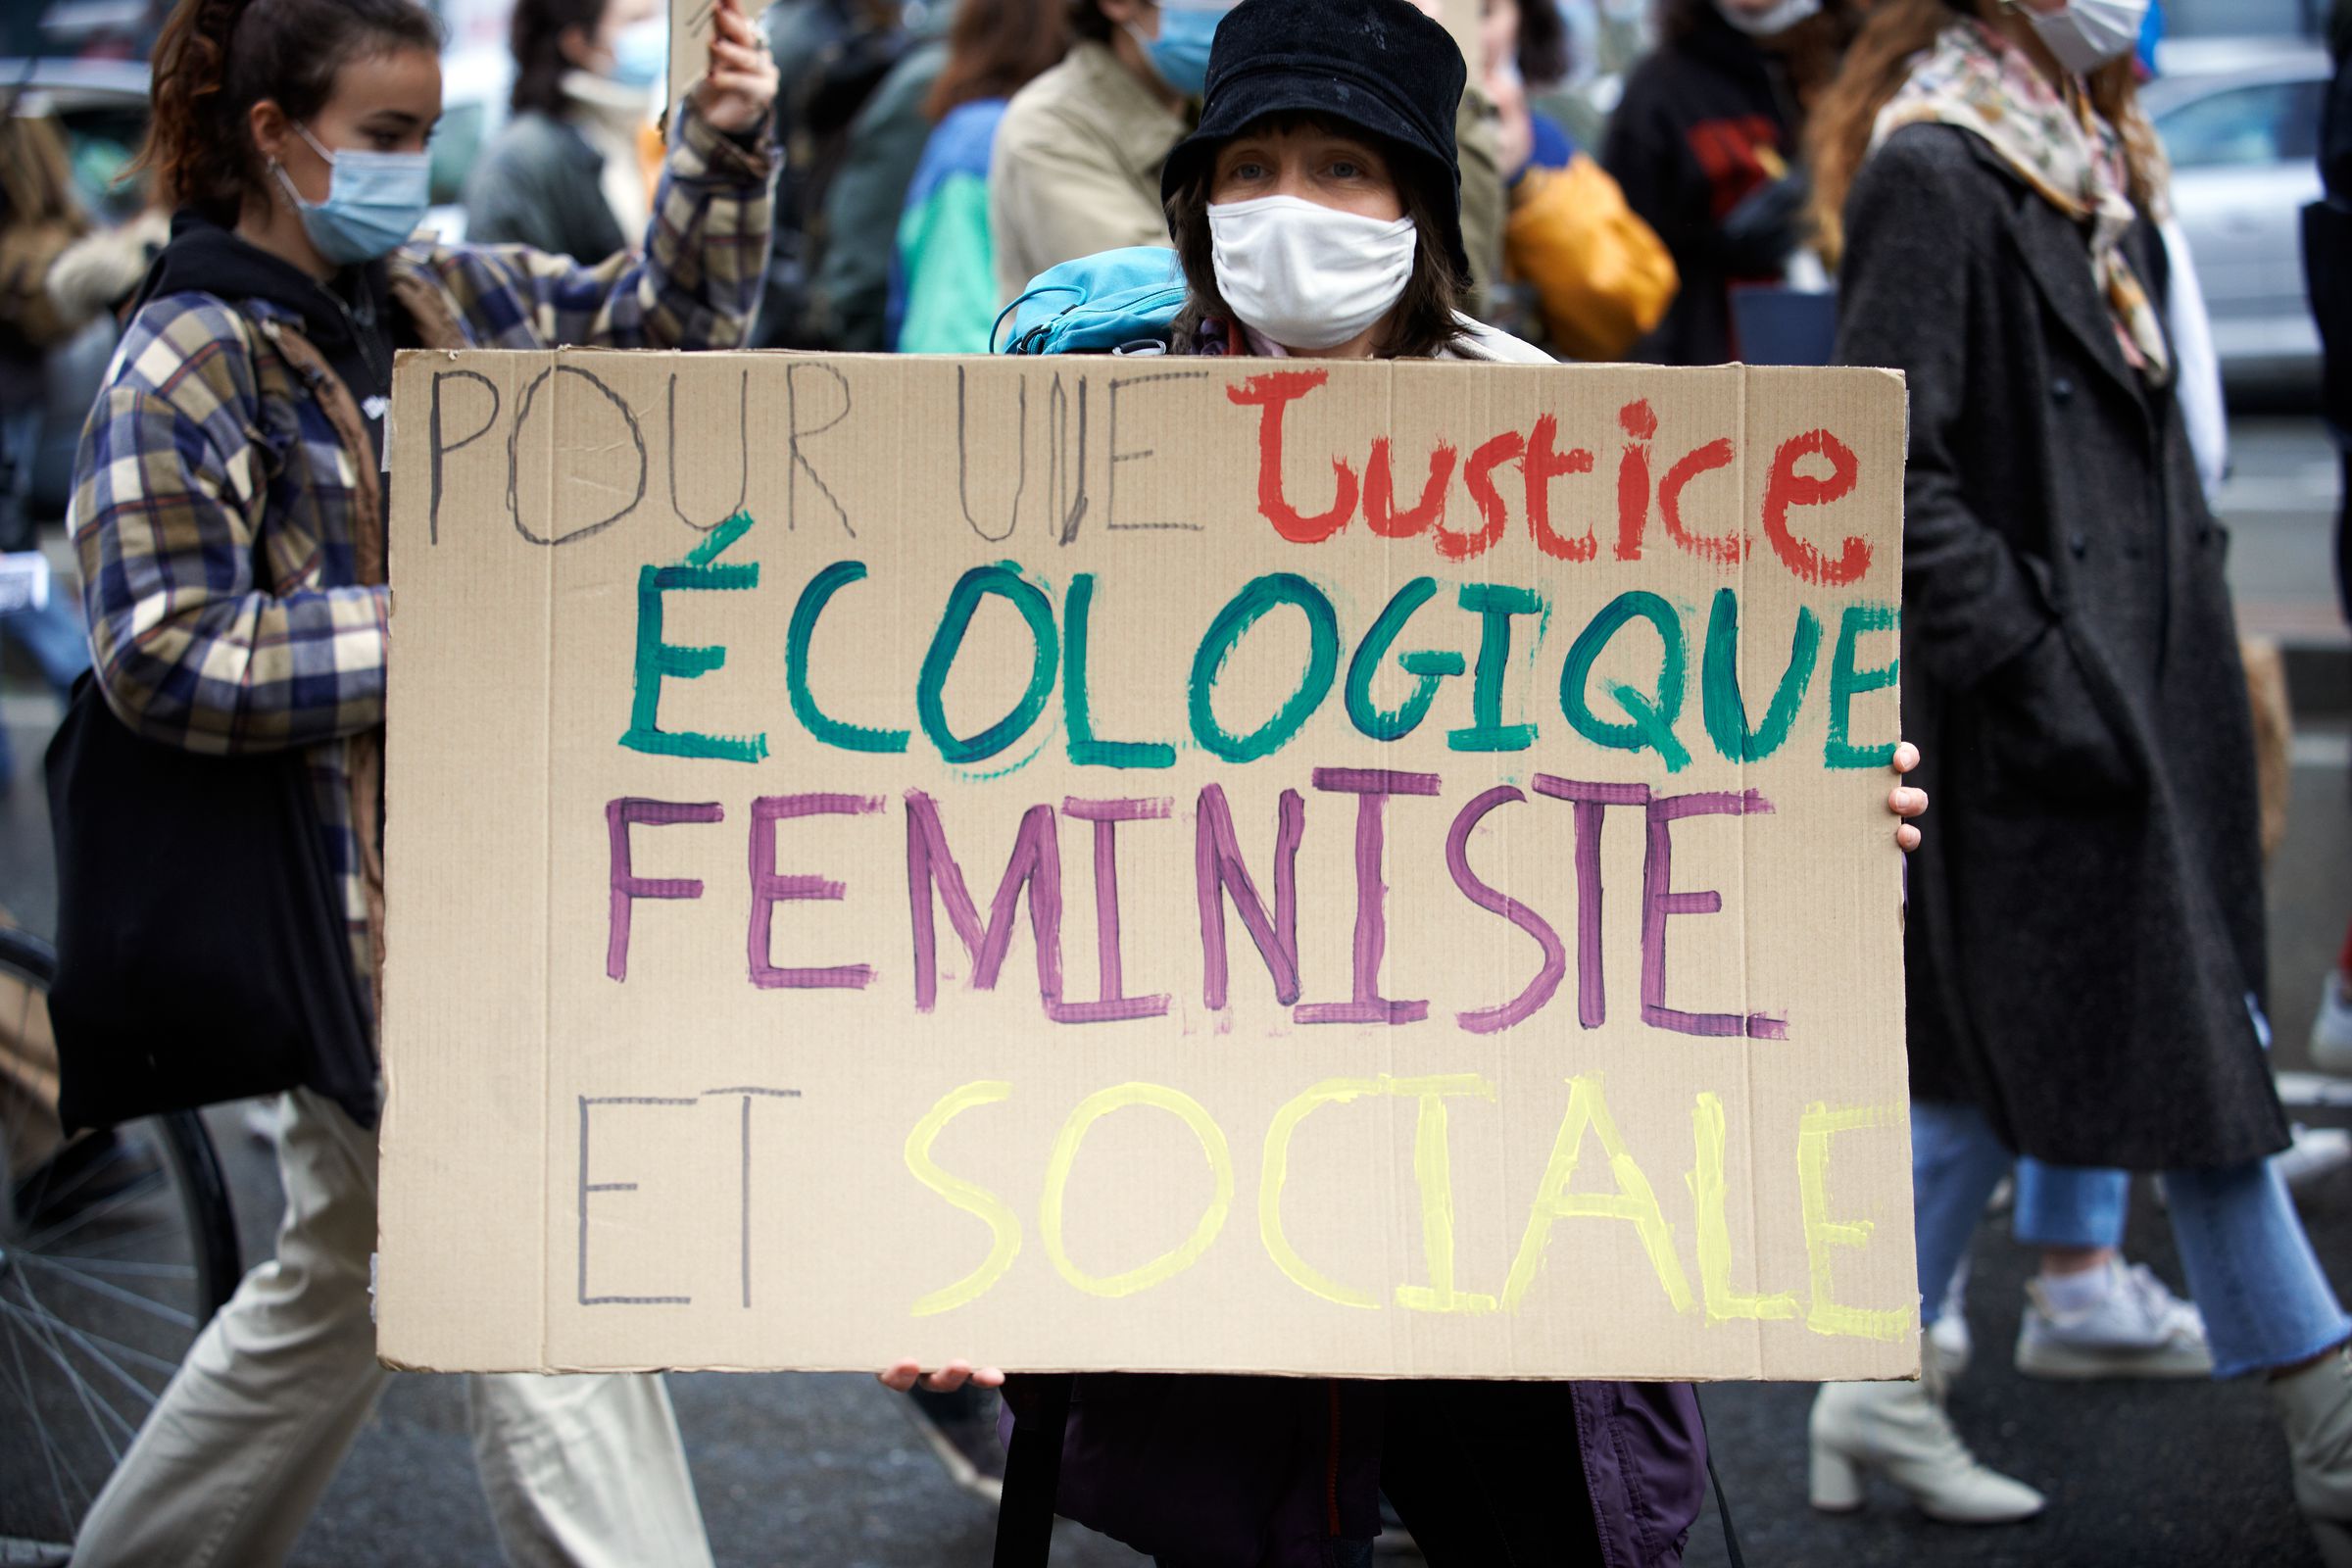 A person holds a cardboard sign with a message written in French that says, “Pour une justice ecologique feministe et sociale.”